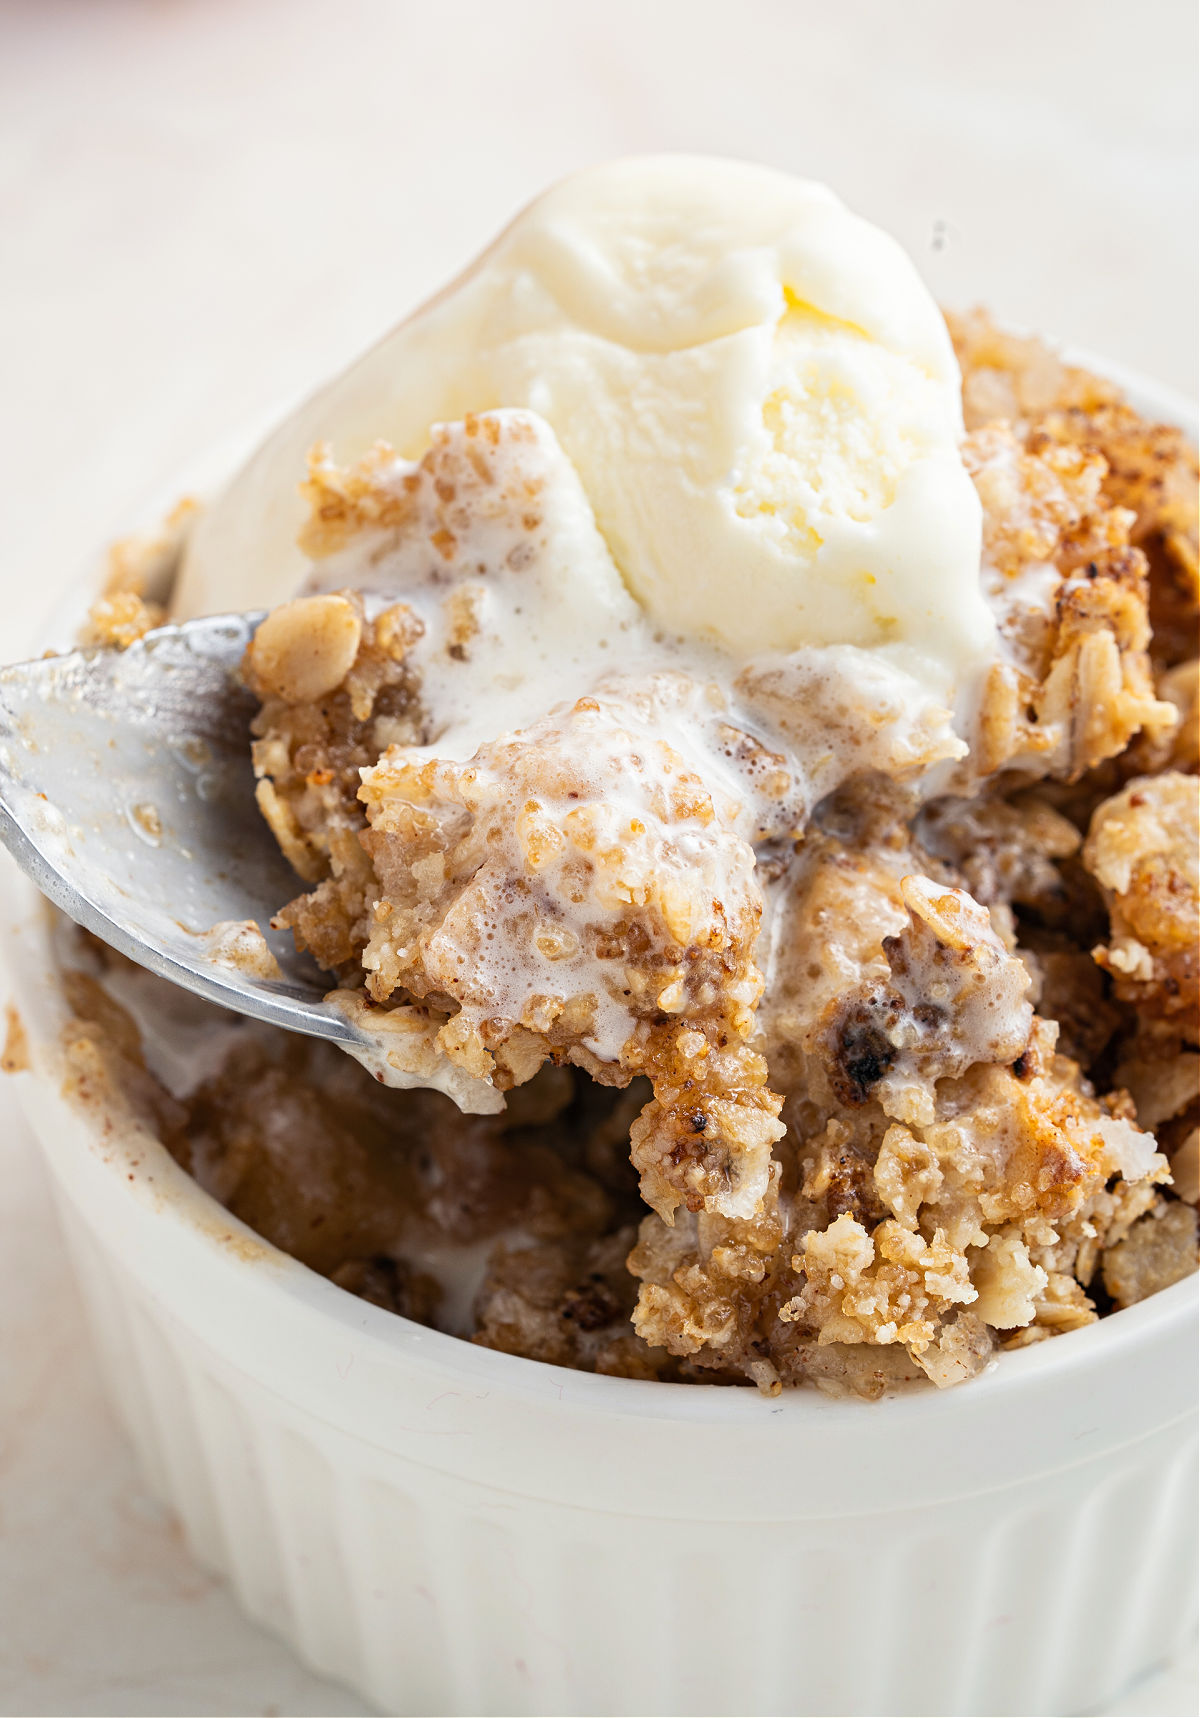 Apple crisp served with vanilla ice cream in a white bowl.